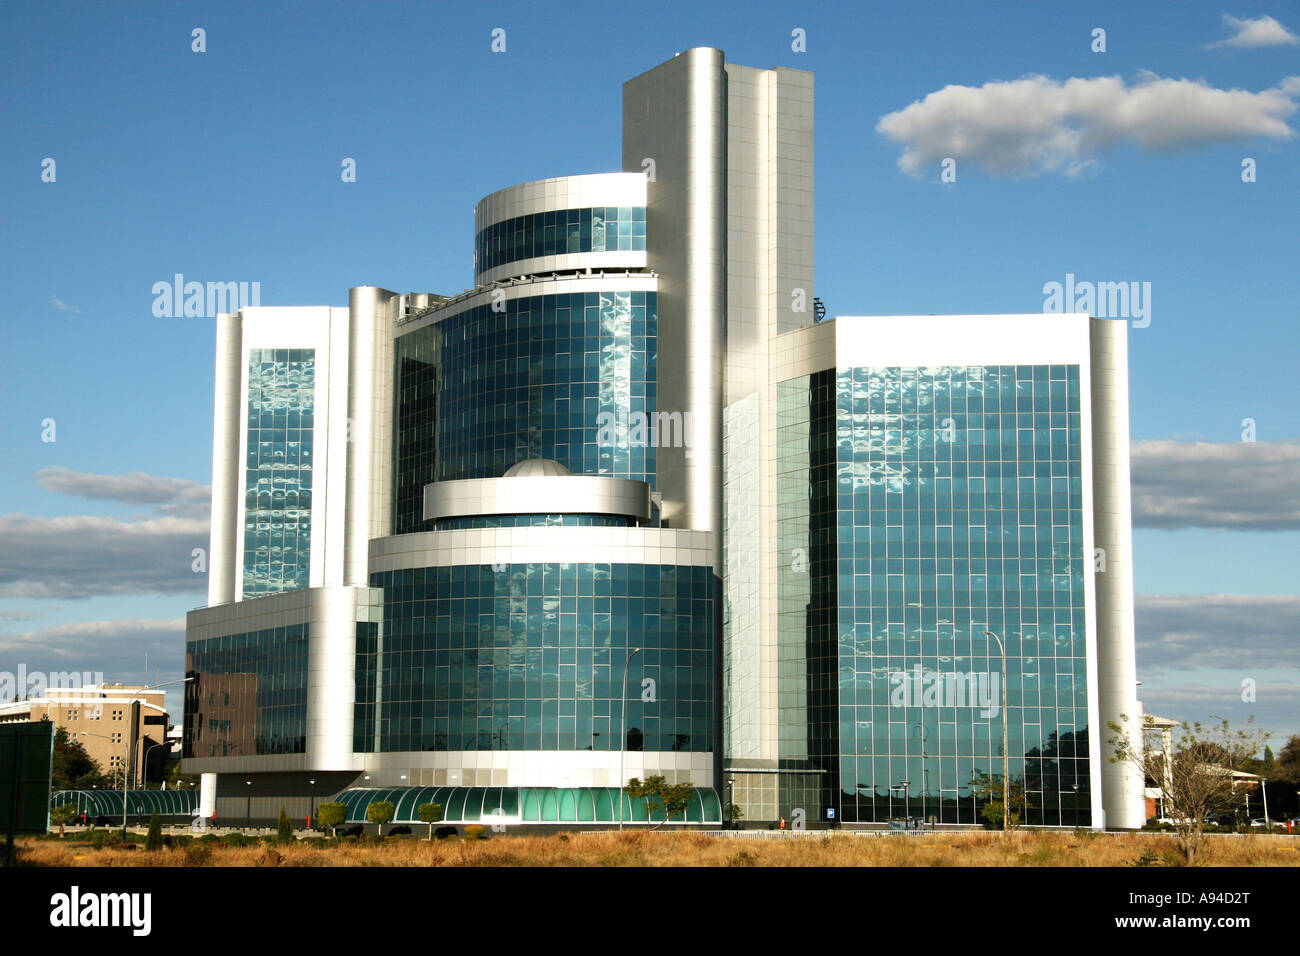 This new and impressive high rise building houses the department of taxes in Gaborone Botswana Stock Photo